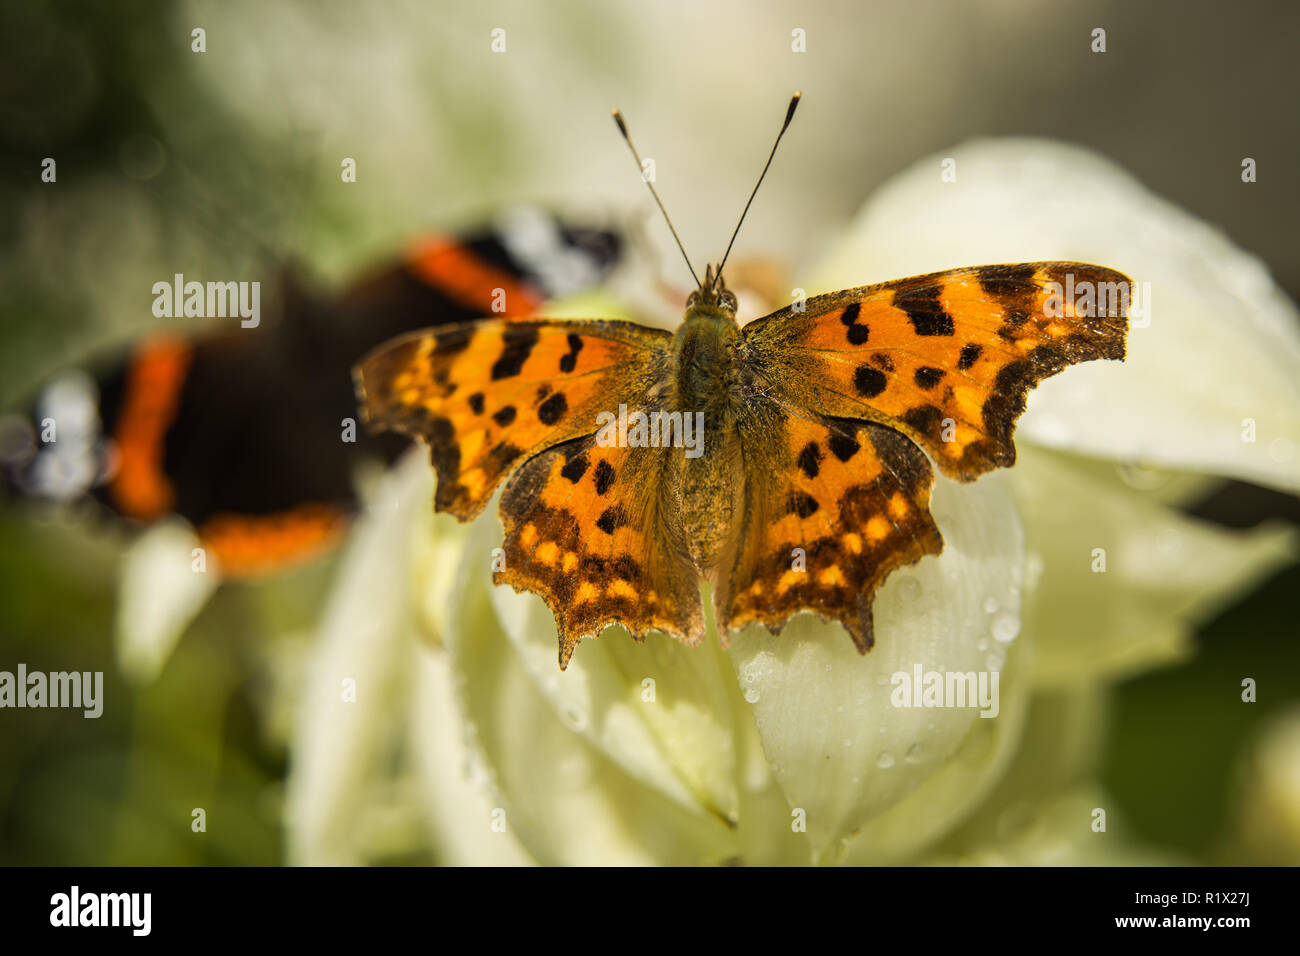 A comma butterfly perched on a flower Stock Photo